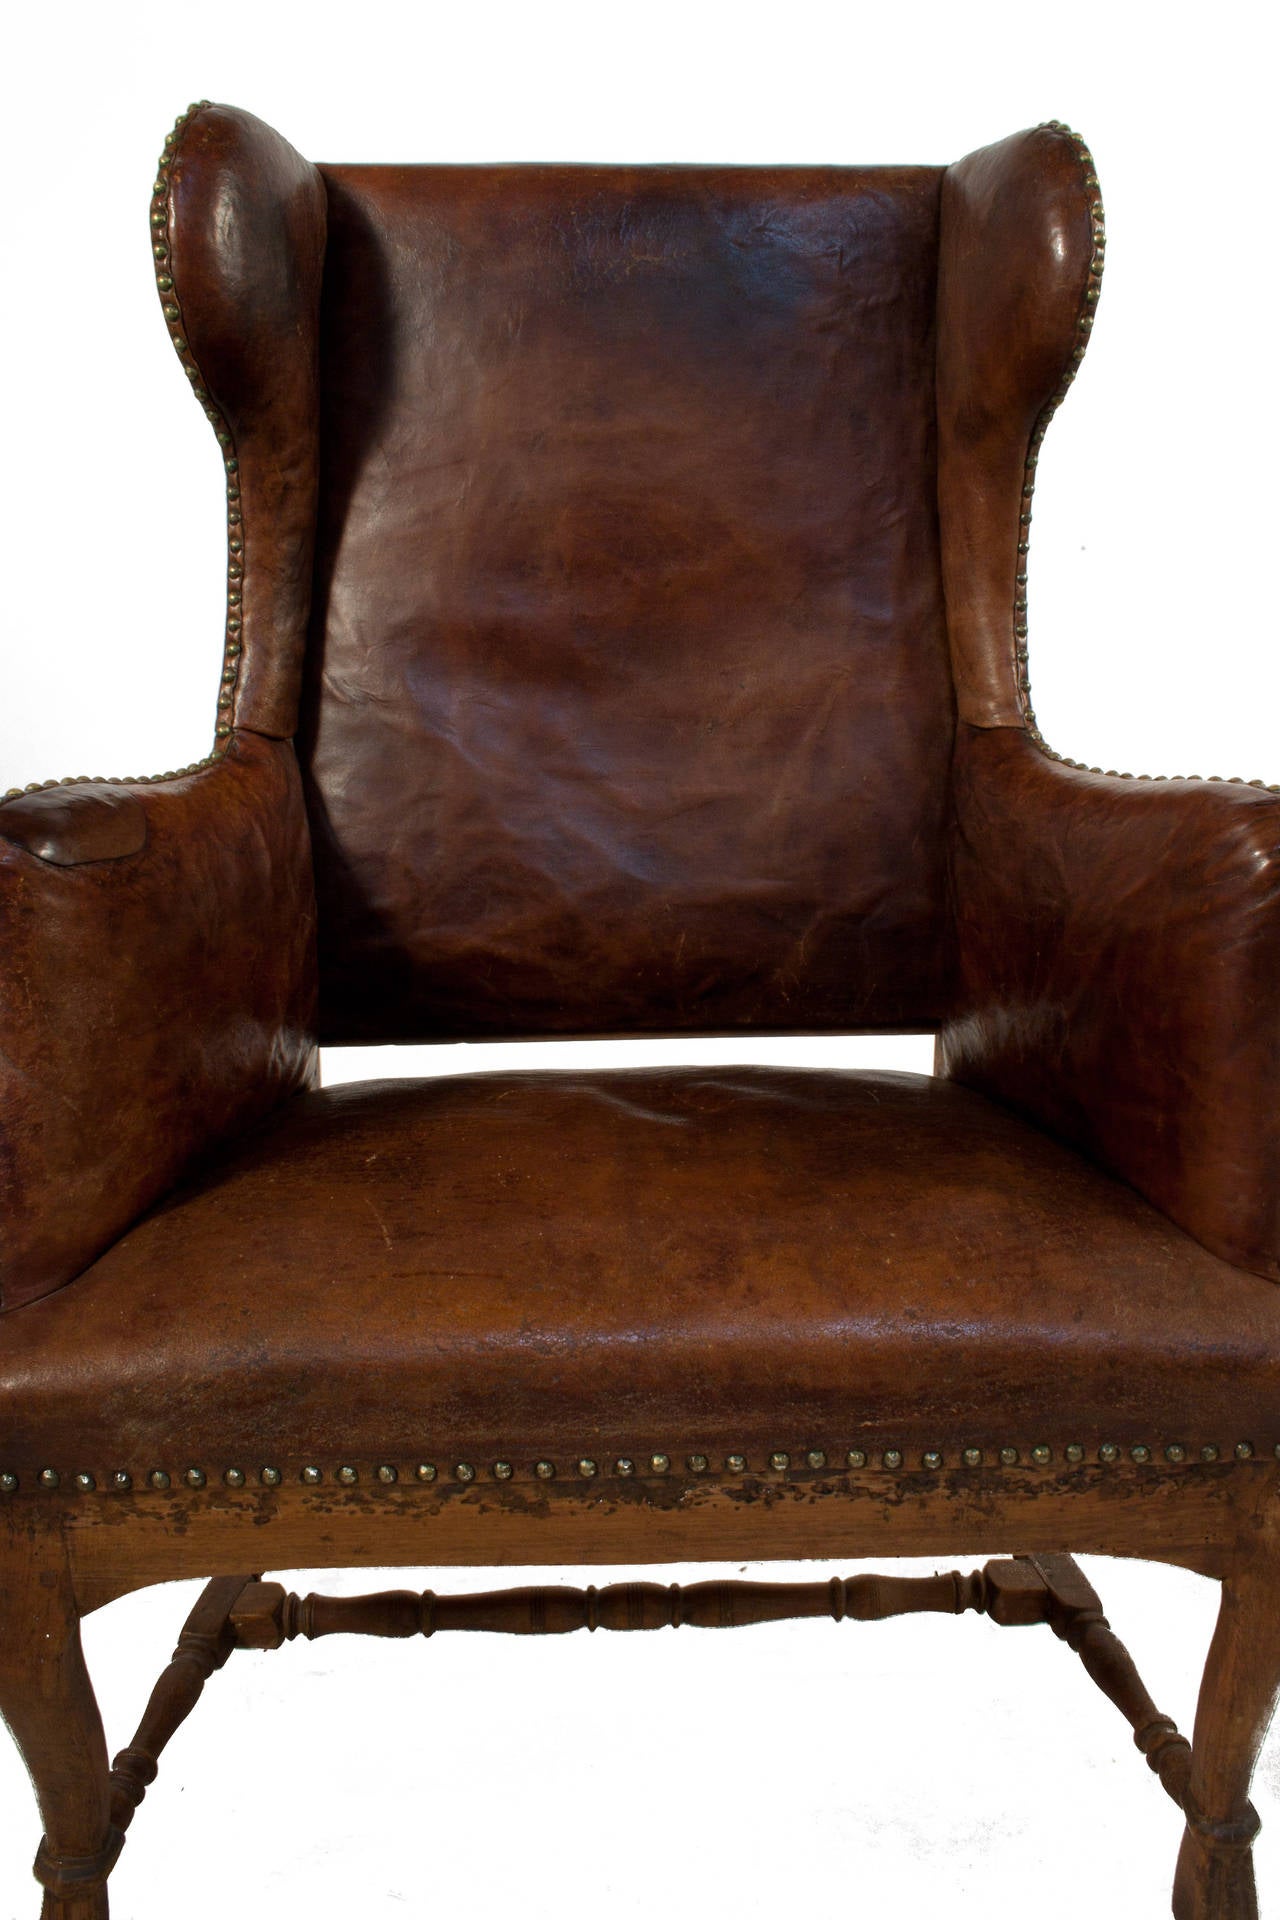 Early 18th Century Baroque Wingback Chair in Leather